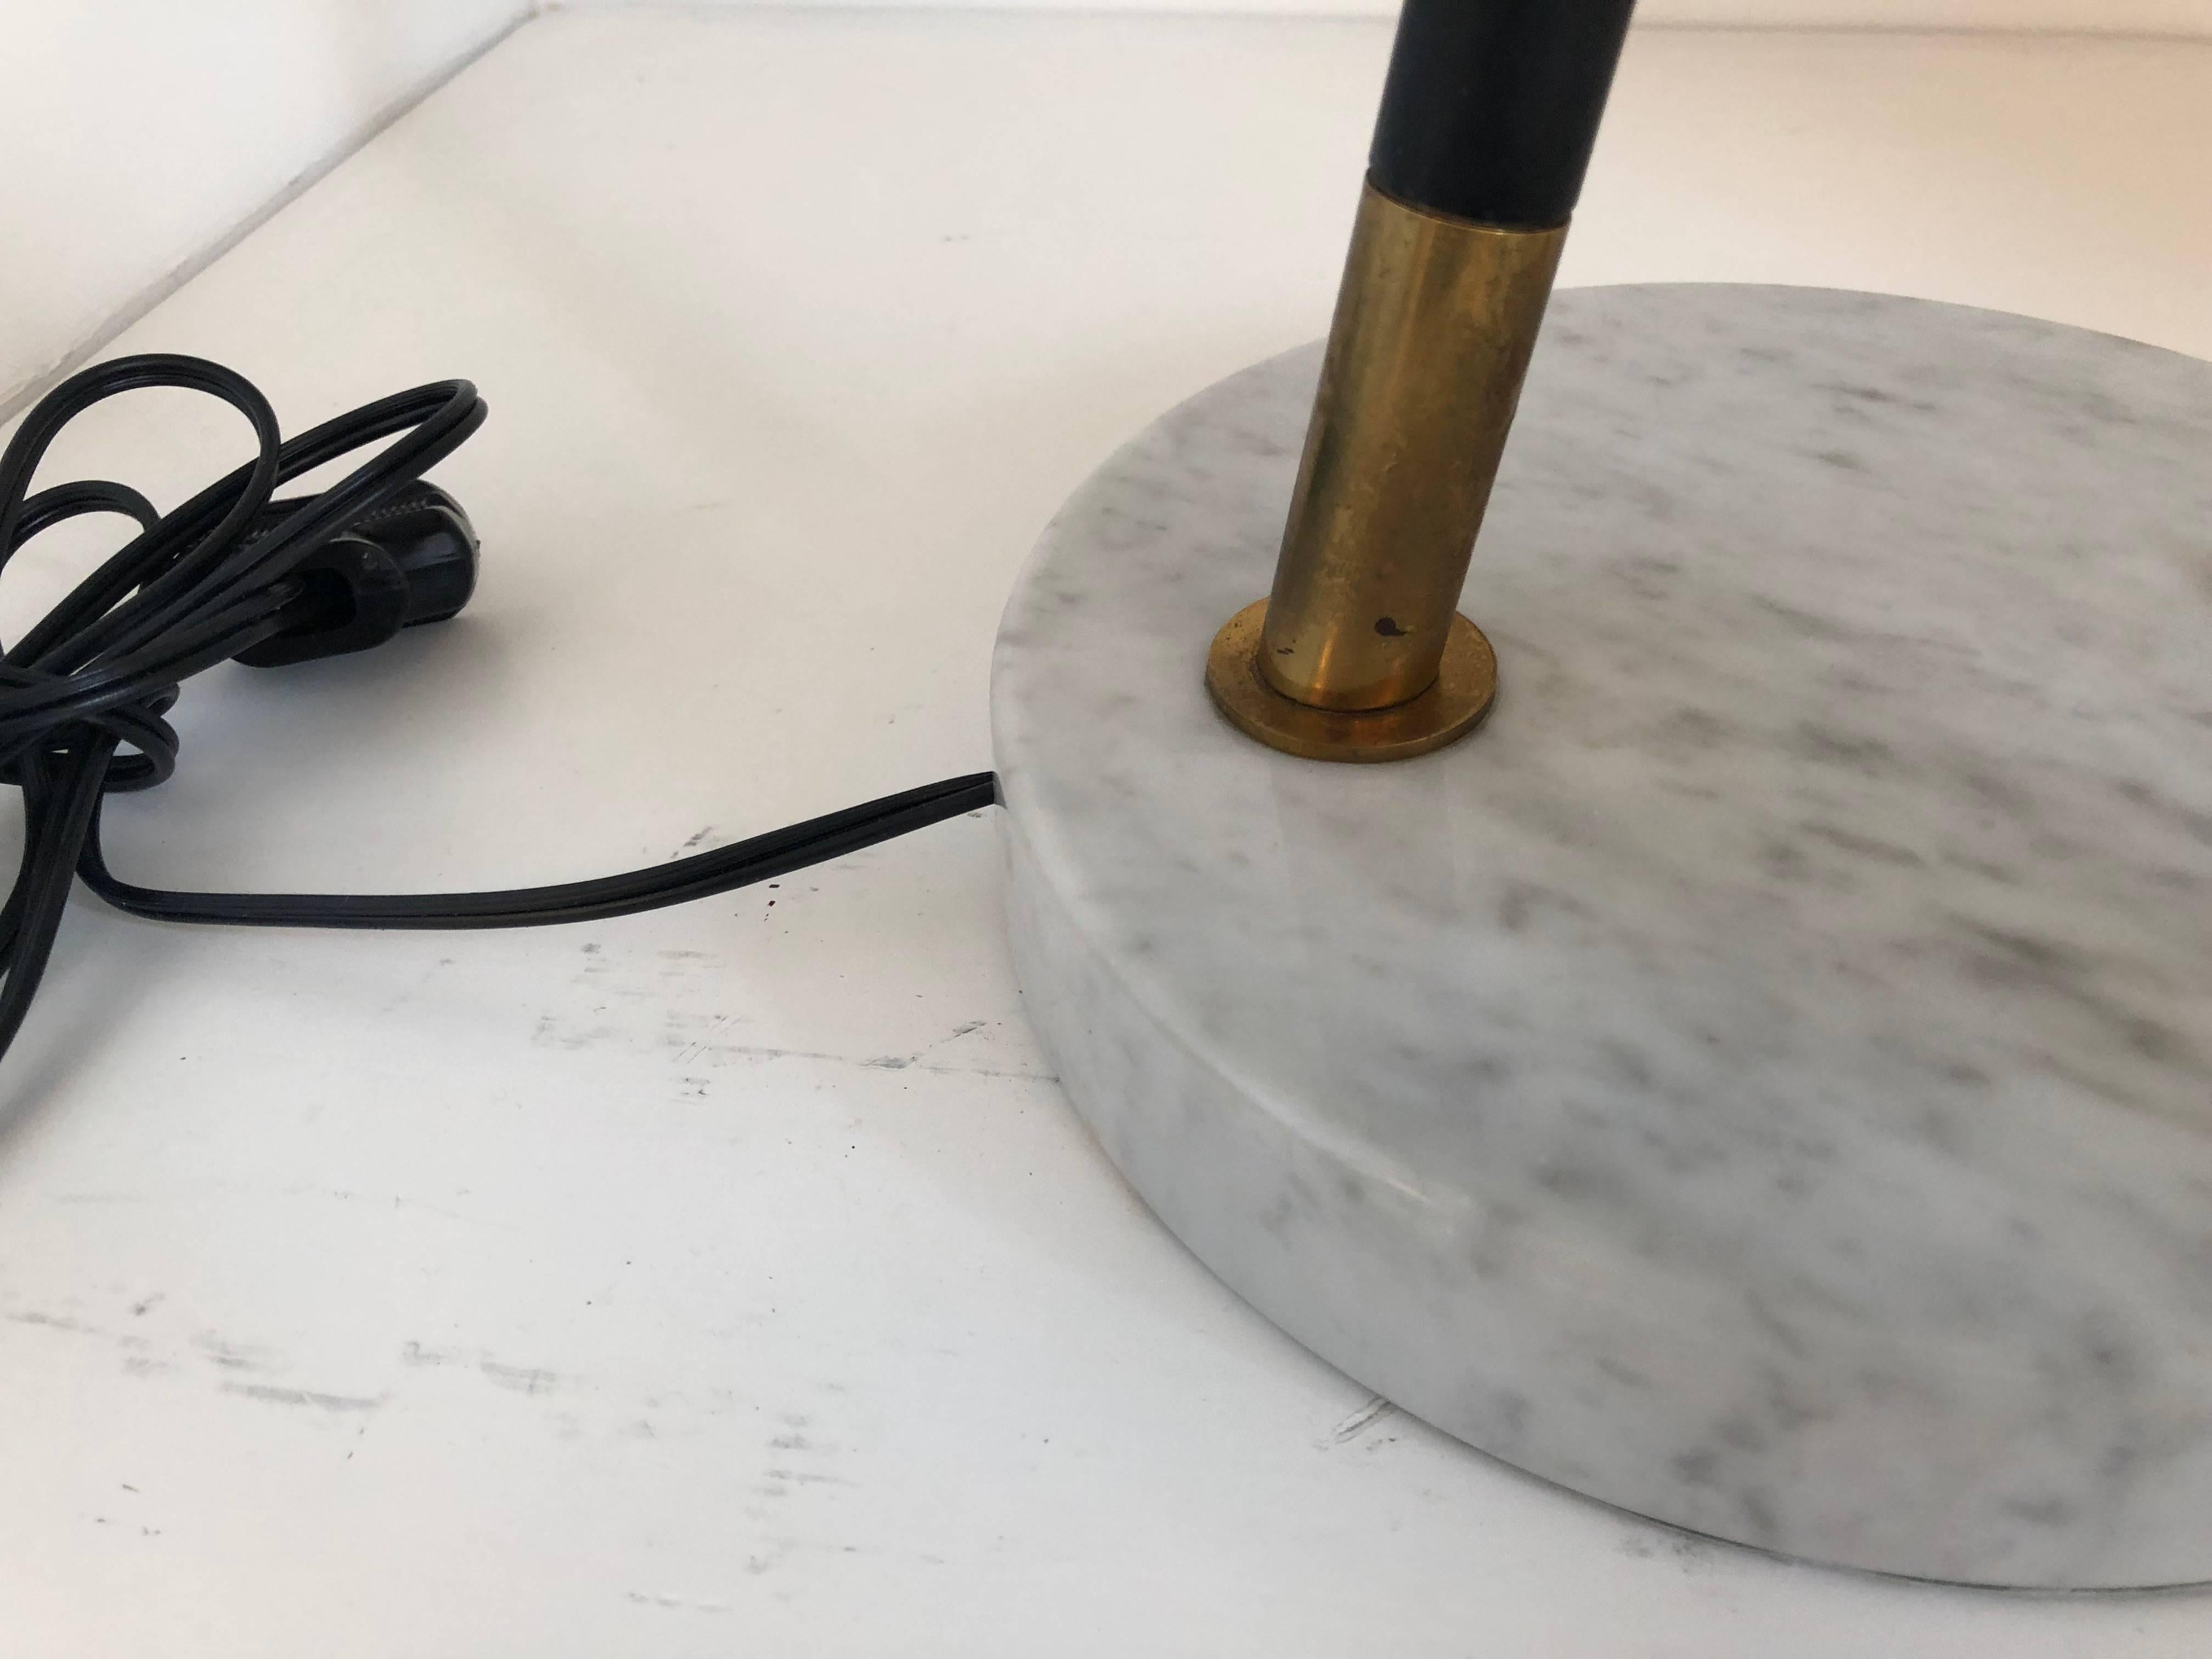 This Italian task lamp was manufactured by Stilux/Milano, features a carrara marble base, adjustable arm and stem in black with brass and an acrylic white shade. 


